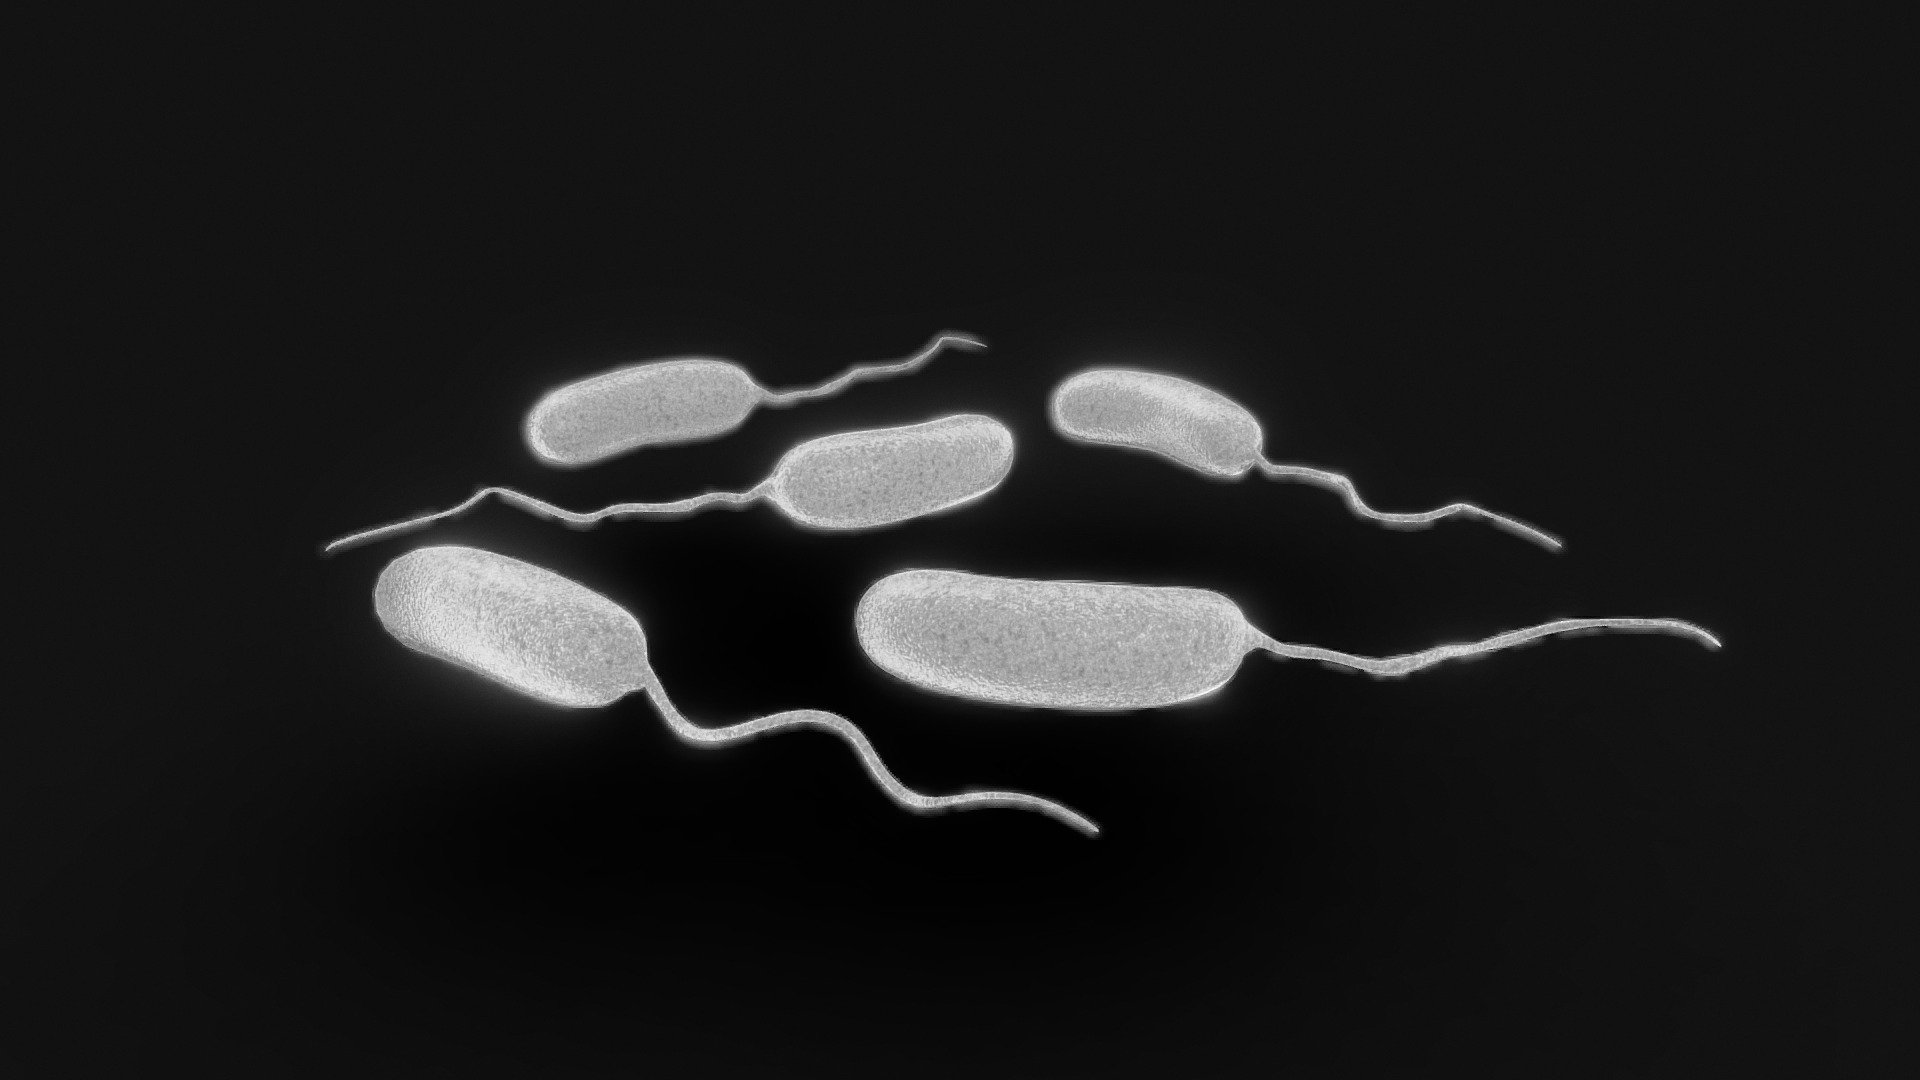 Vibrio Cholerae Bacteria

Vibrio cholerae is a bacterium responsible for causing cholera, a severe diarrheal disease. It spreads through contaminated water and food, leading to dehydration and potentially fatal consequences if left untreated.




Format: FBX, OBJ, MTL, STL, glb, glTF, Blender v4.0.2

Optimized UVs

PBR Textures | 1024x1024 - 2048x2048 - 4096x4096 | (1K, 2K, 4K - Jpeg, Png)

Base Color (Albedo)

Normal Map

AO Map

Metallic Map

Roughness Map

Height Map
 - Vibrio Cholerae Bacteria - Buy Royalty Free 3D model by Nima (@h3ydari96) 3d model